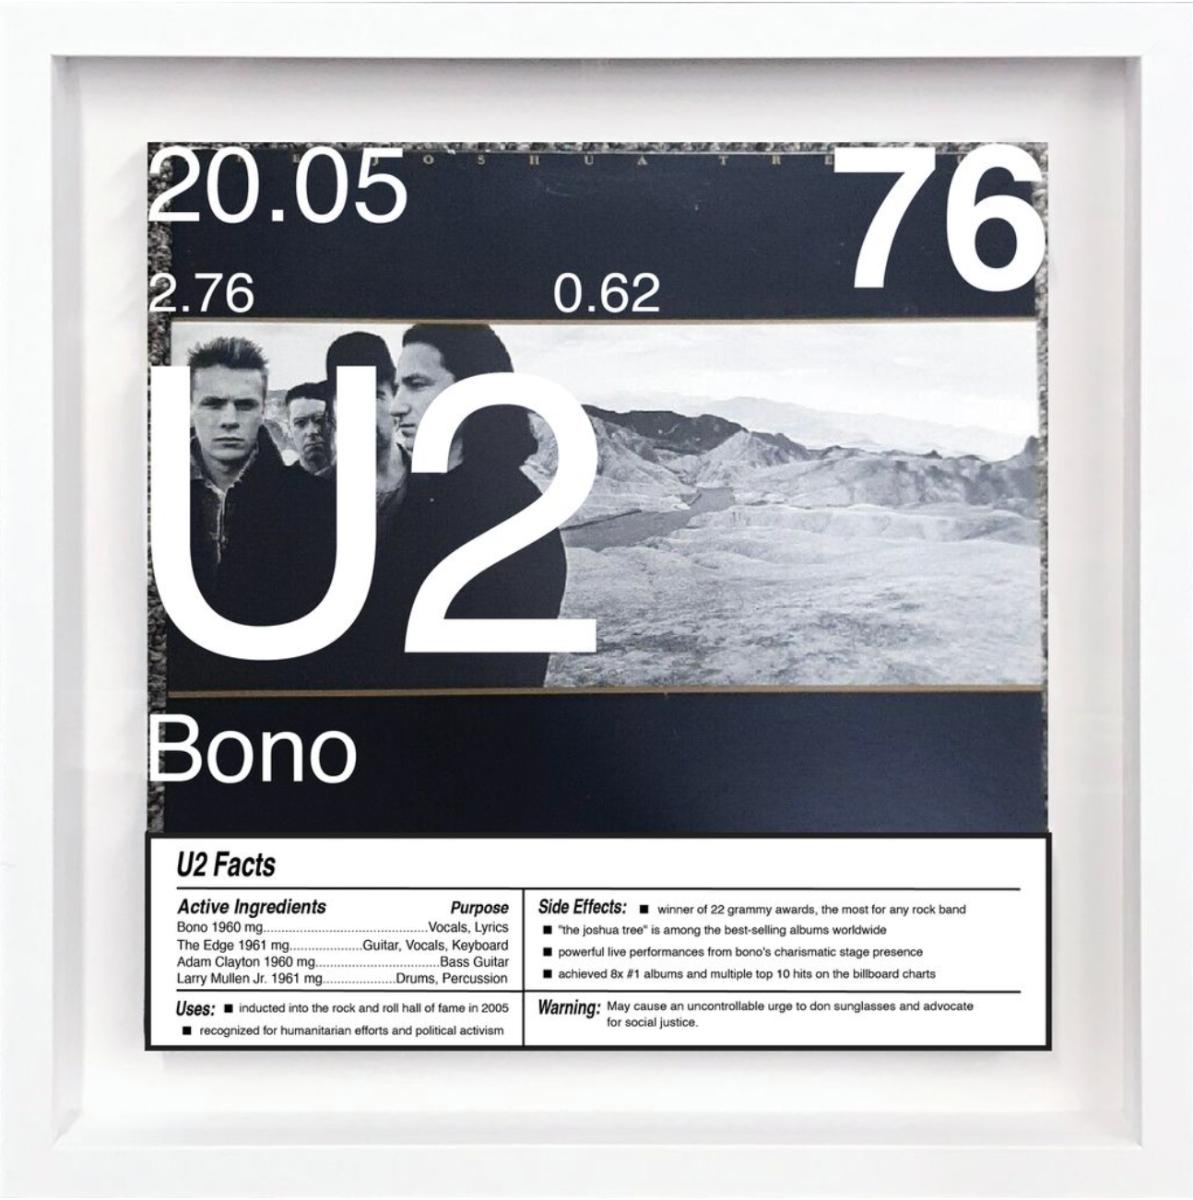 U2_76 Limited edition 9/9

Daniel Allen Cohen, a Los Angeles-based artist renowned for his multidisciplinary approach, transforms popular culture into conceptual art. His creations are nuanced reflections of societal values, desires, necessities,